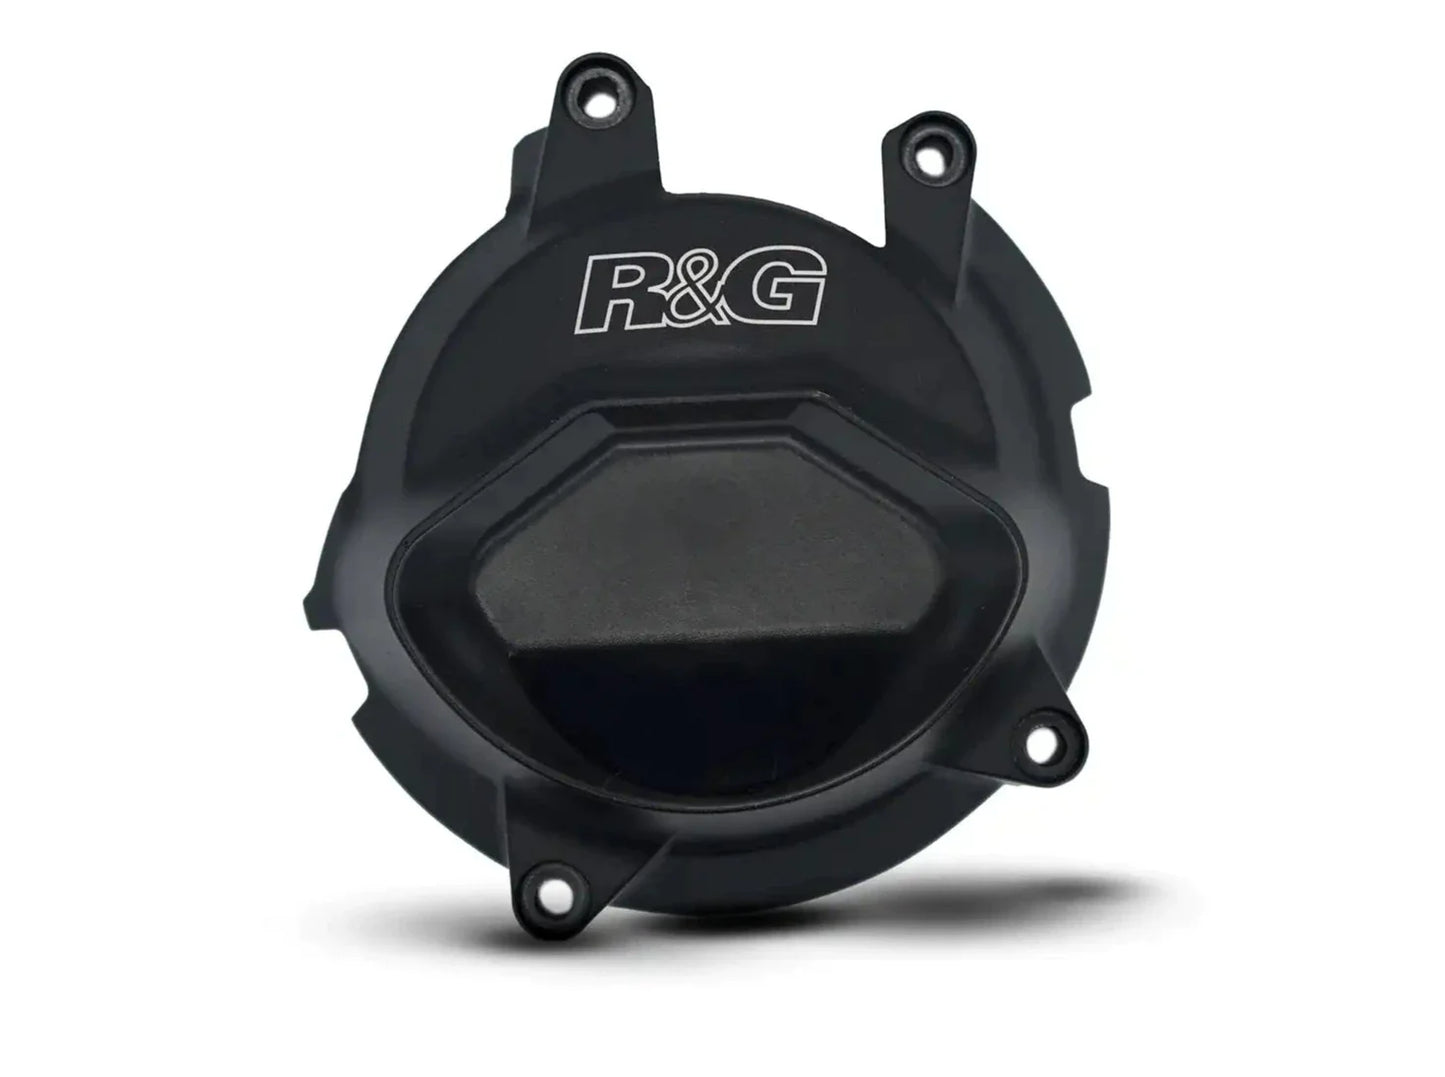 ECC0287 - R&G RACING BMW S1000RR / S1000R Generator Cover Protection (left side, PRO)